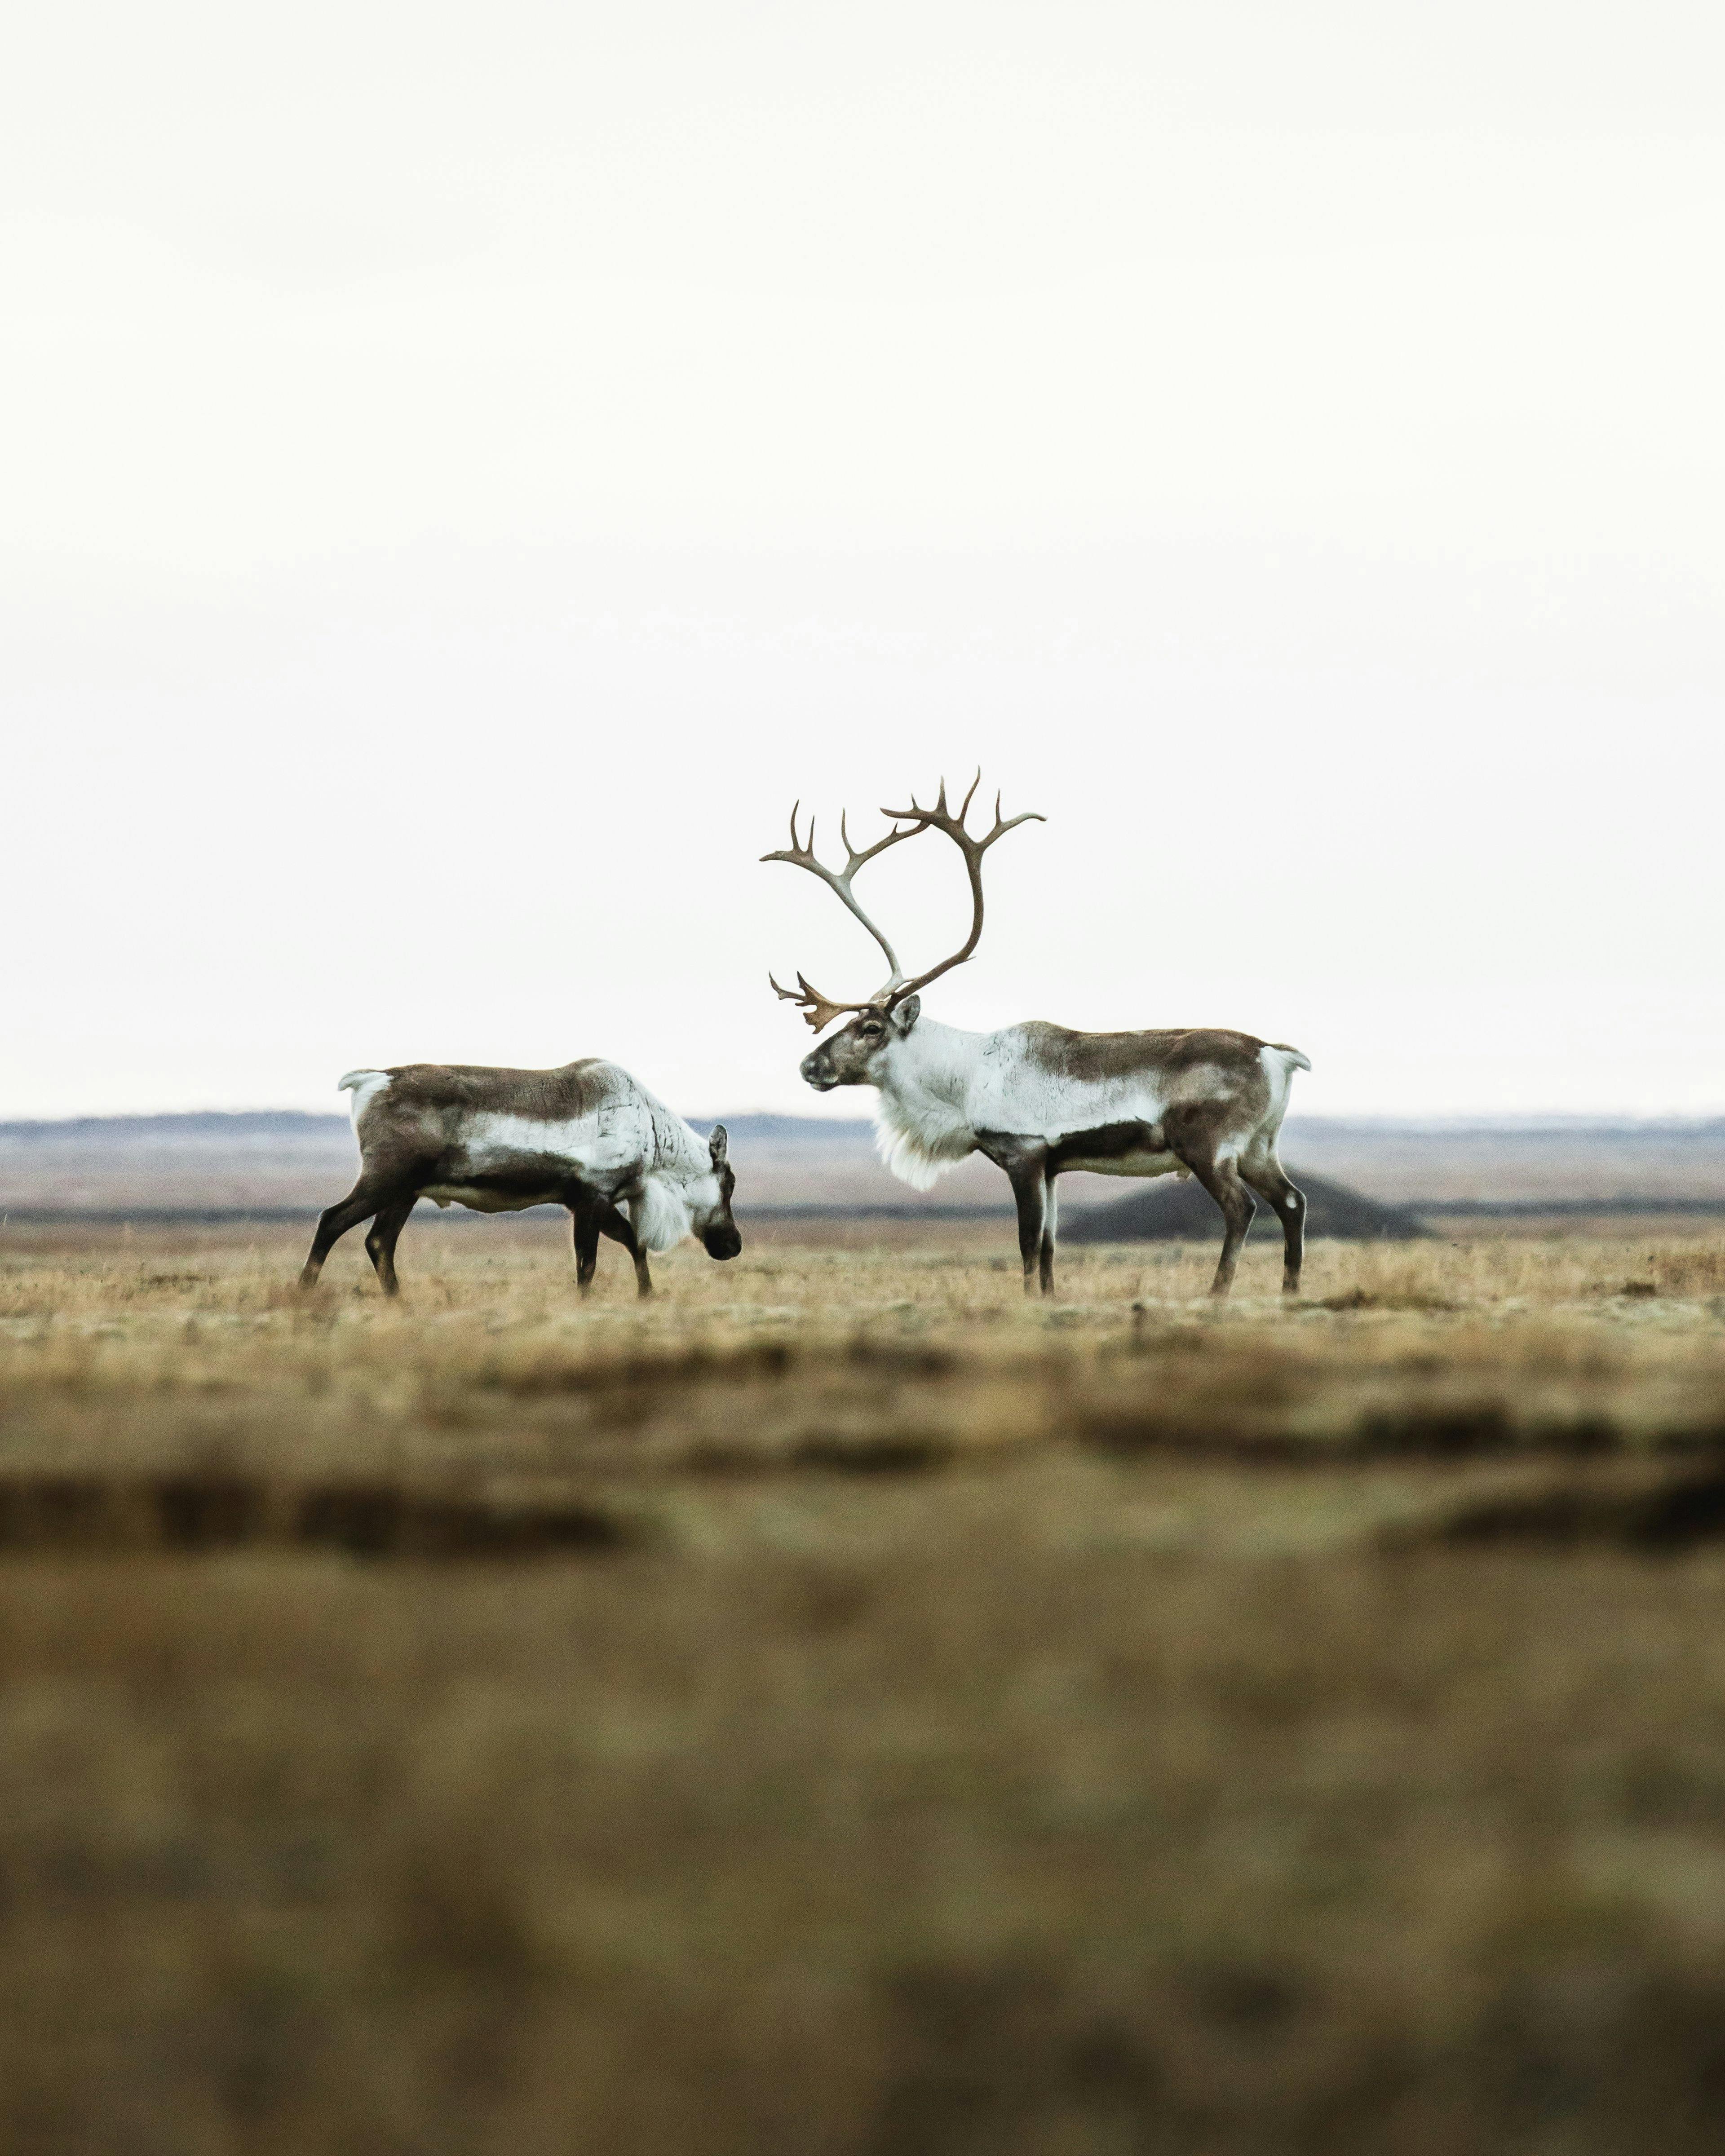 A reindeer bull with giant horns and a reindeer cow grazing.